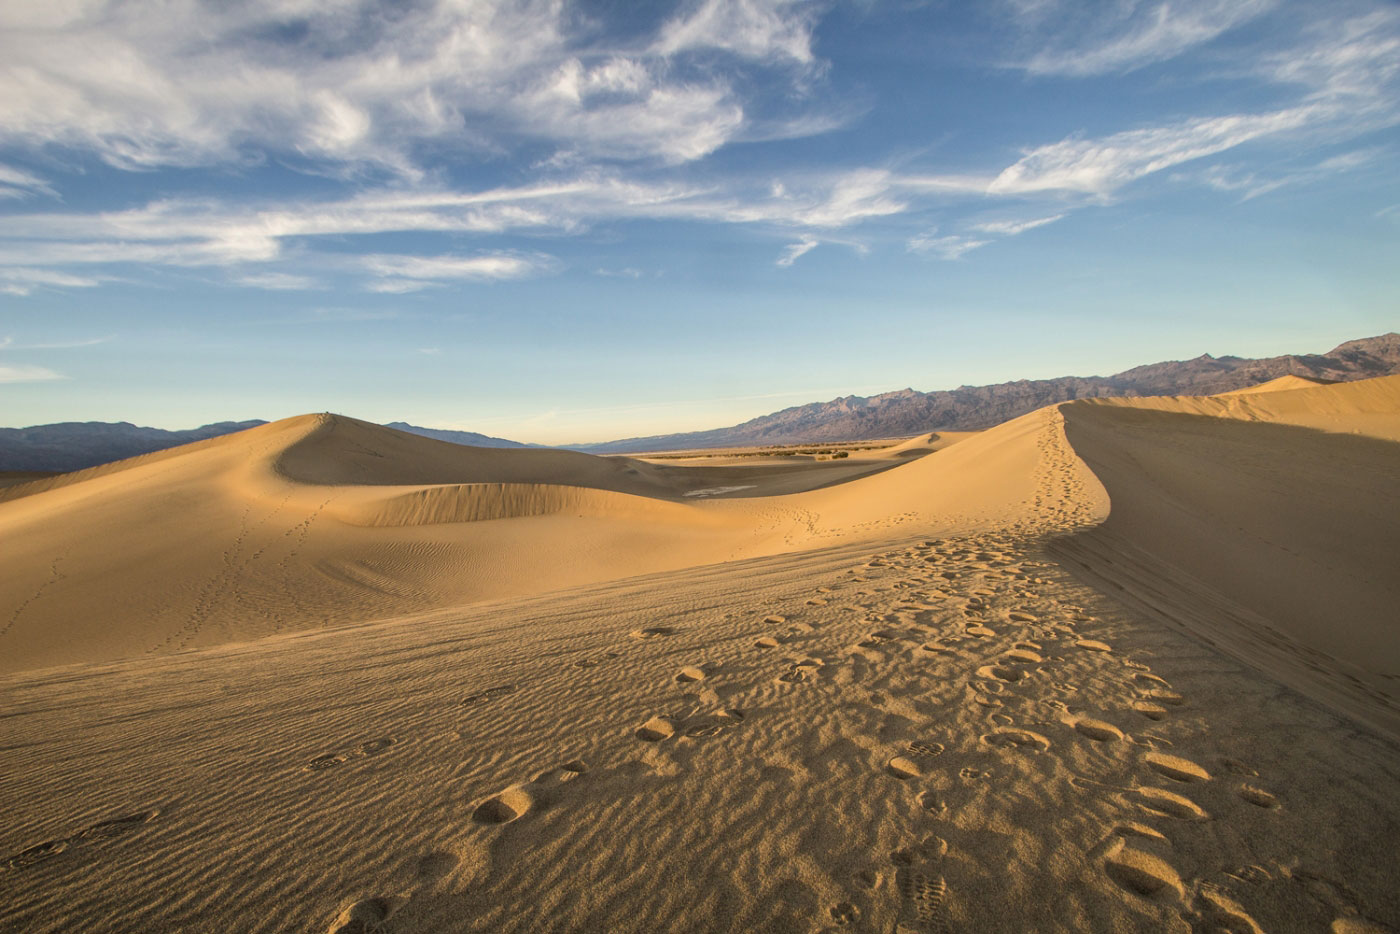 Hike Mesquite Flat Sand Dunes in Death Valley National Park, California - Stav is Lost